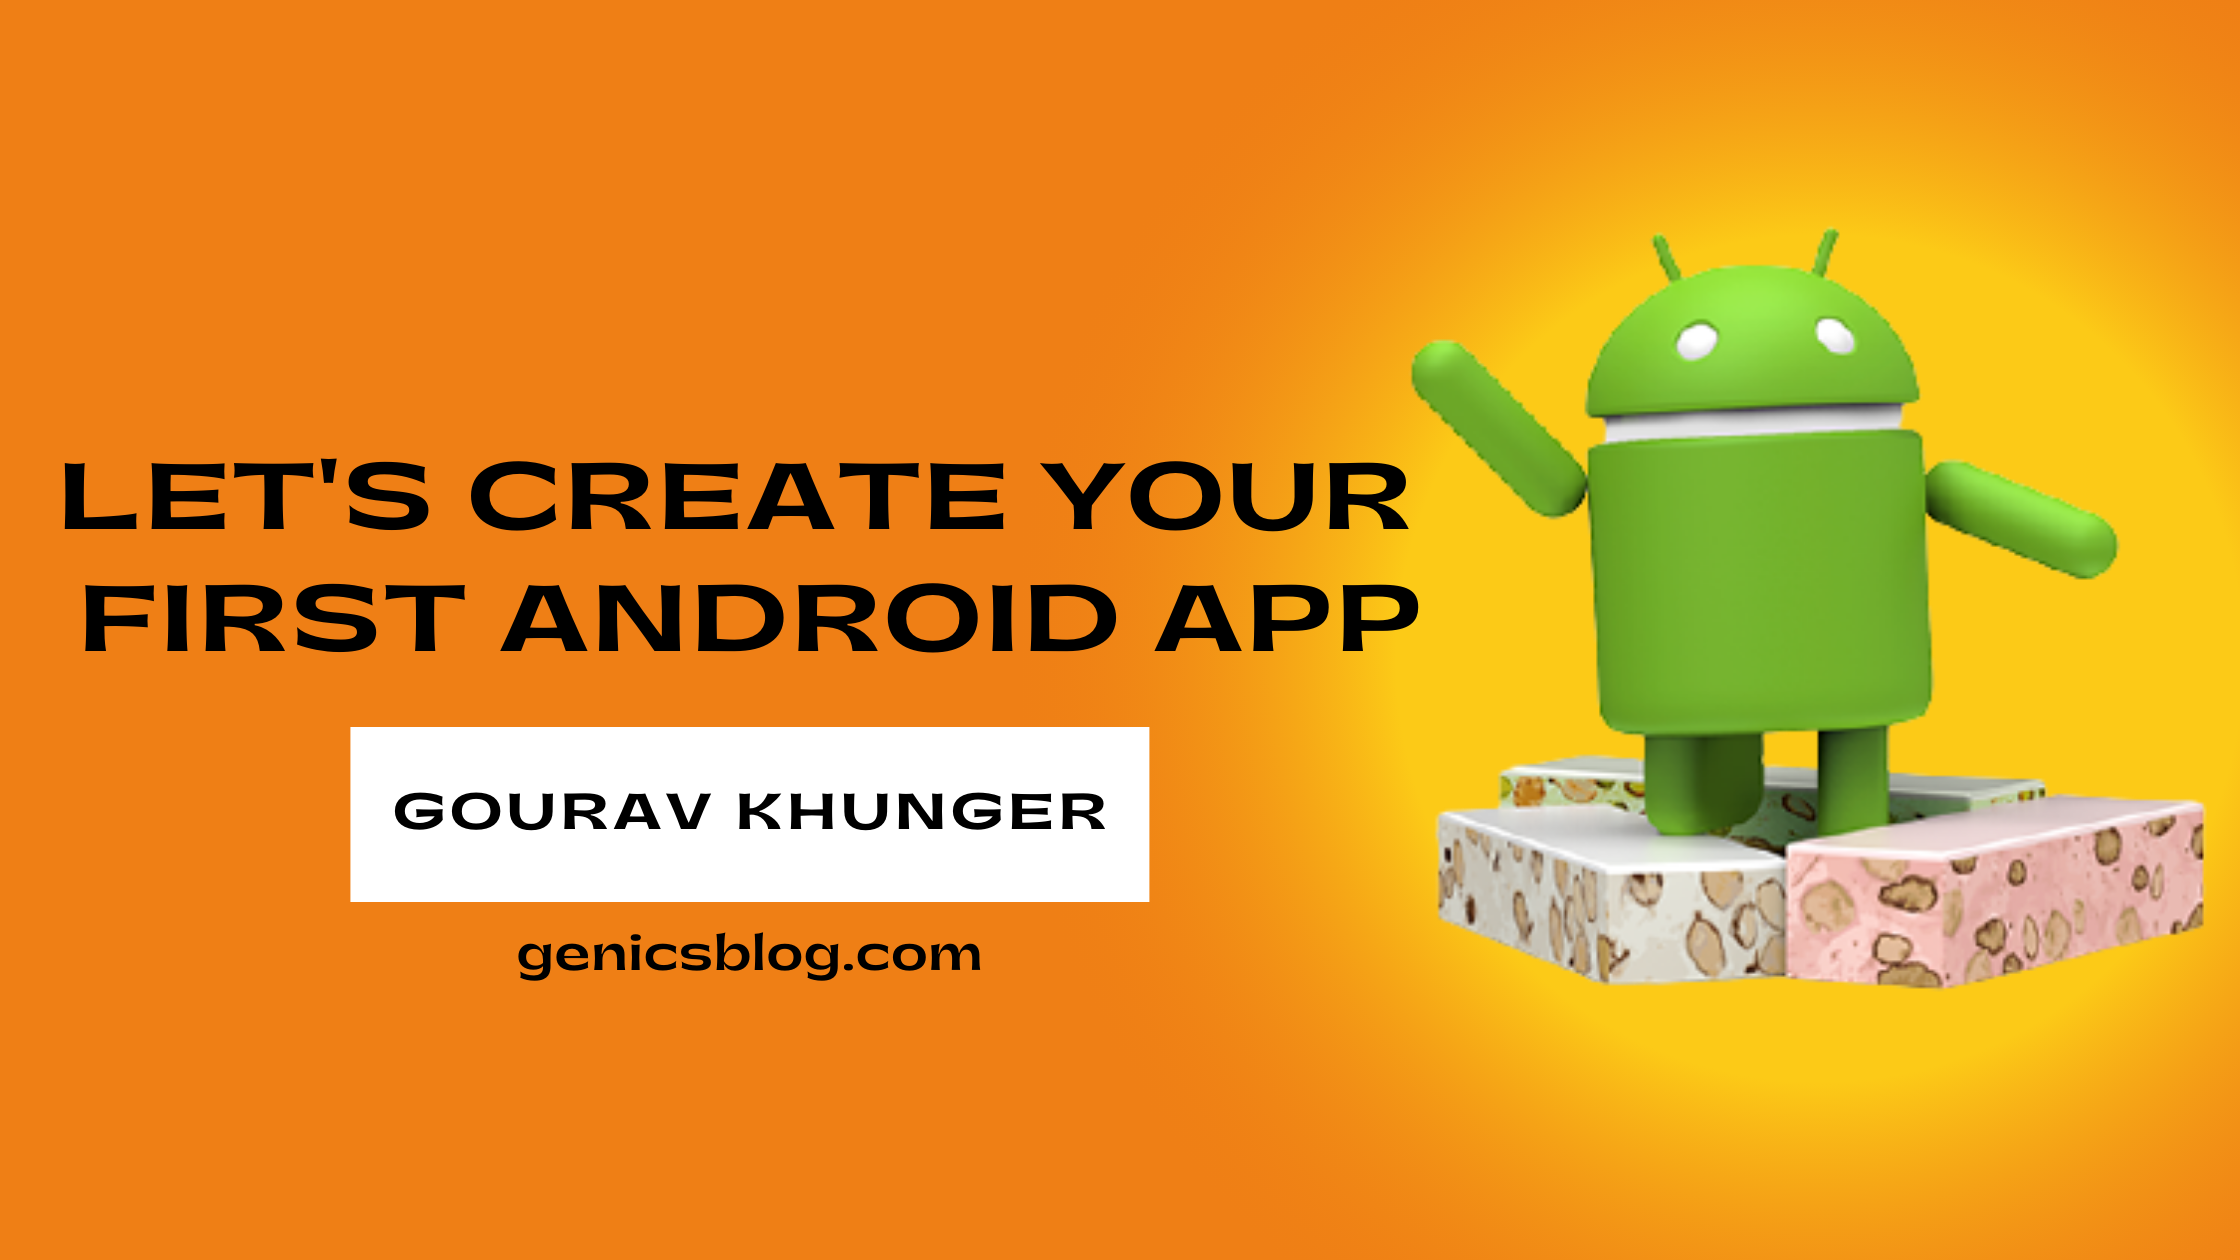 How to create your first Android app using Android Studio?